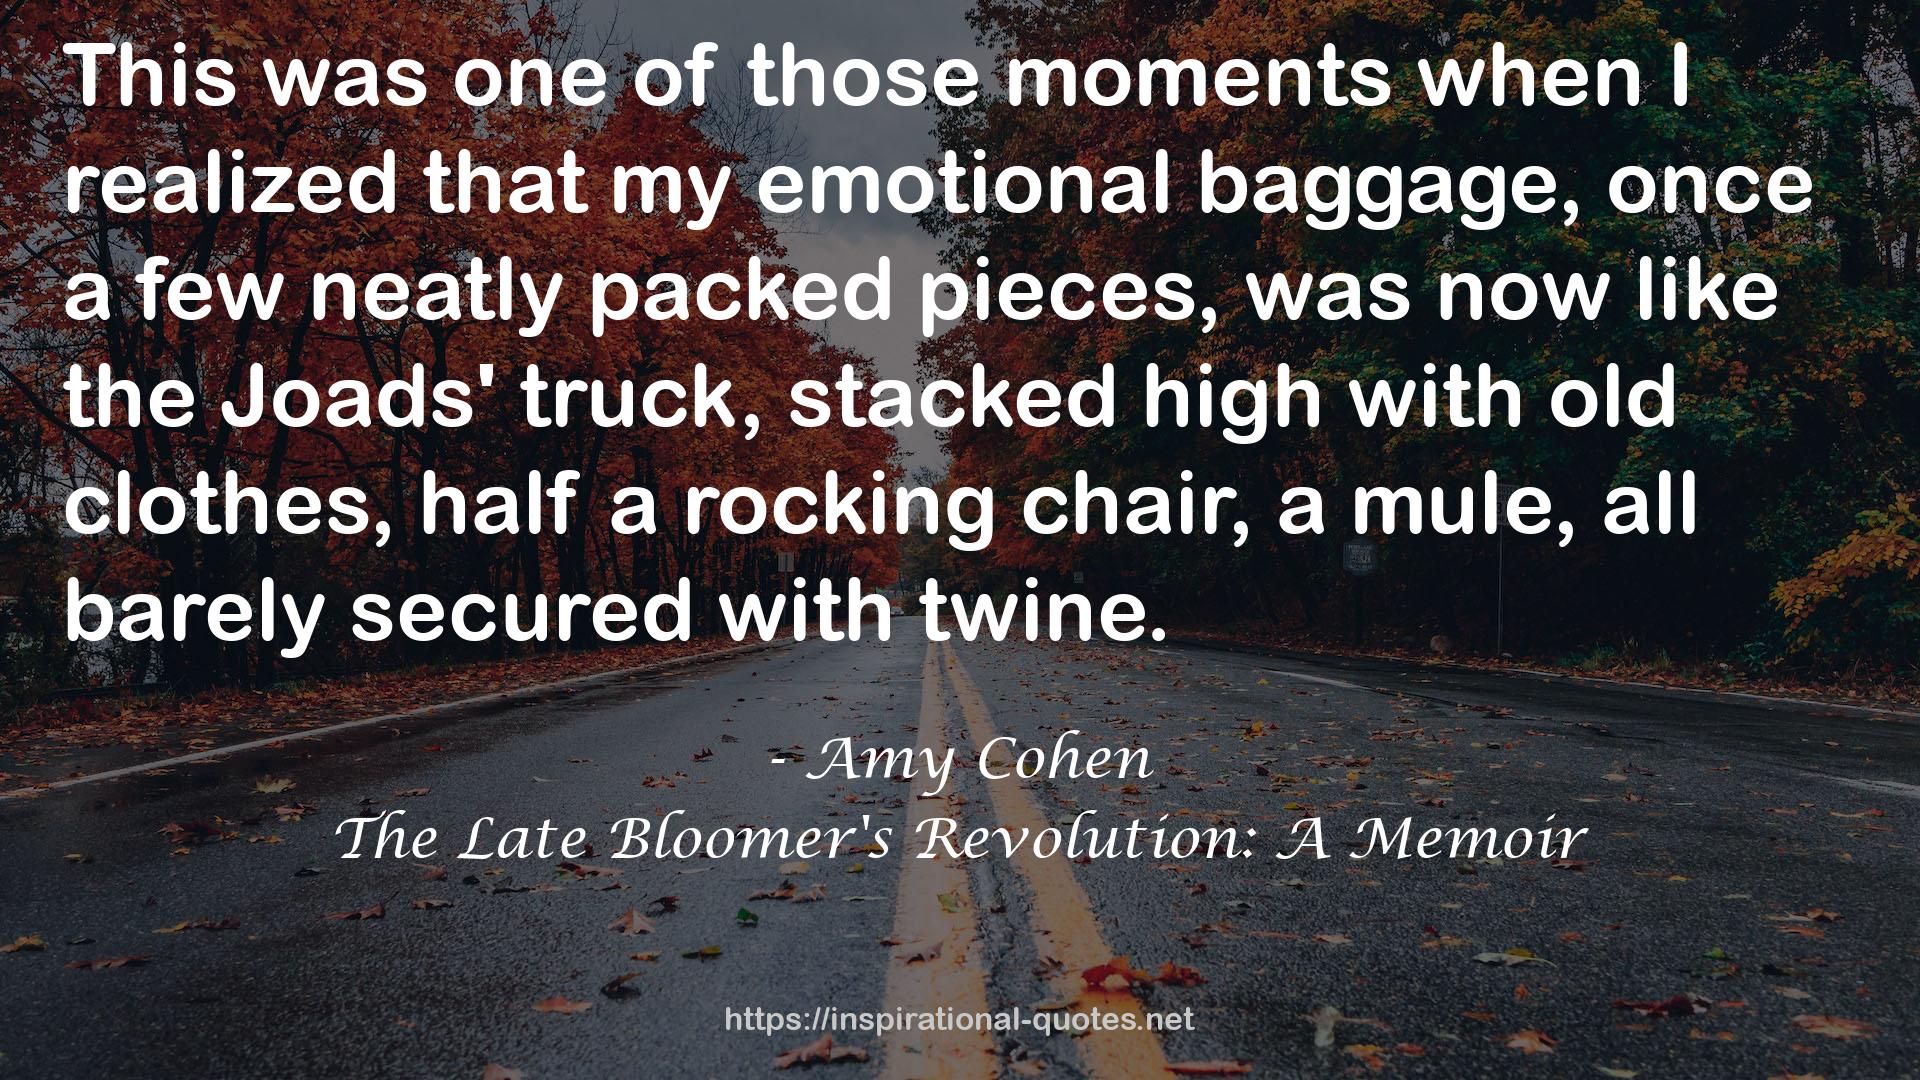 The Late Bloomer's Revolution: A Memoir QUOTES